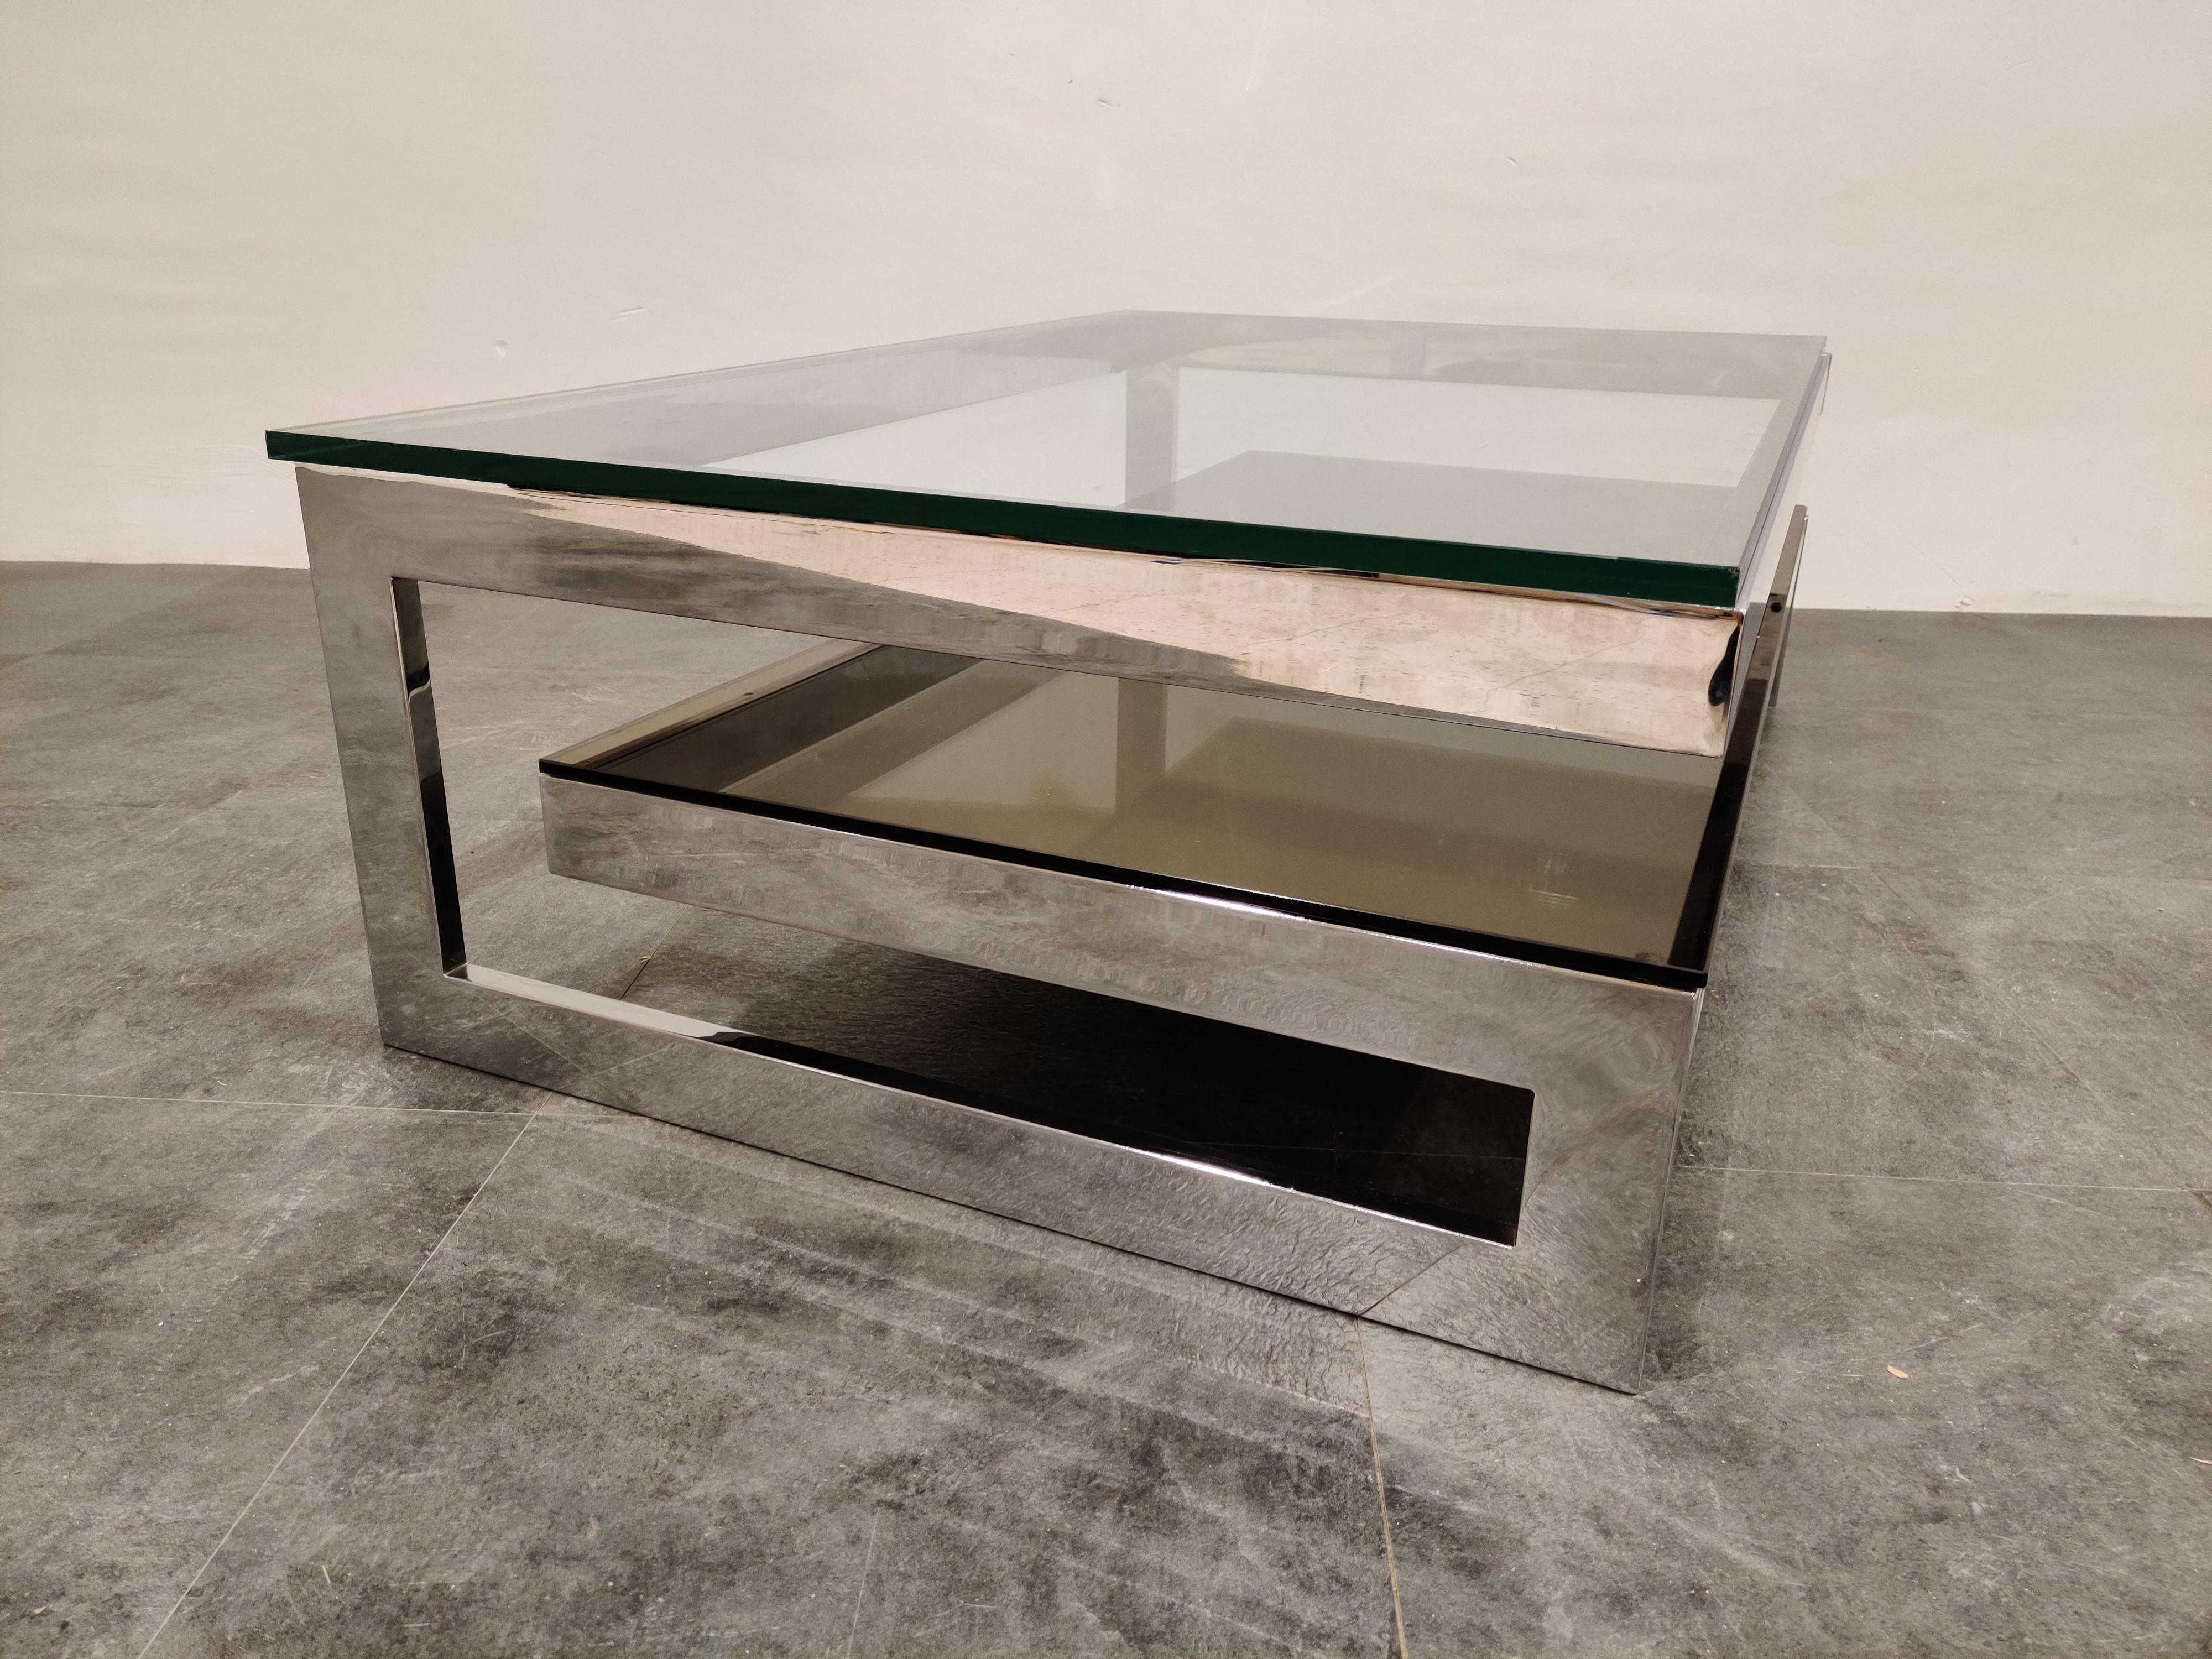 Chrome and thick clear glass two-tier coffee table manufactured by Belgochrom.

This table is a popular model and is referred to as the 'G' model

This is a rare chrome example. (An original chrome example, not brass that has been